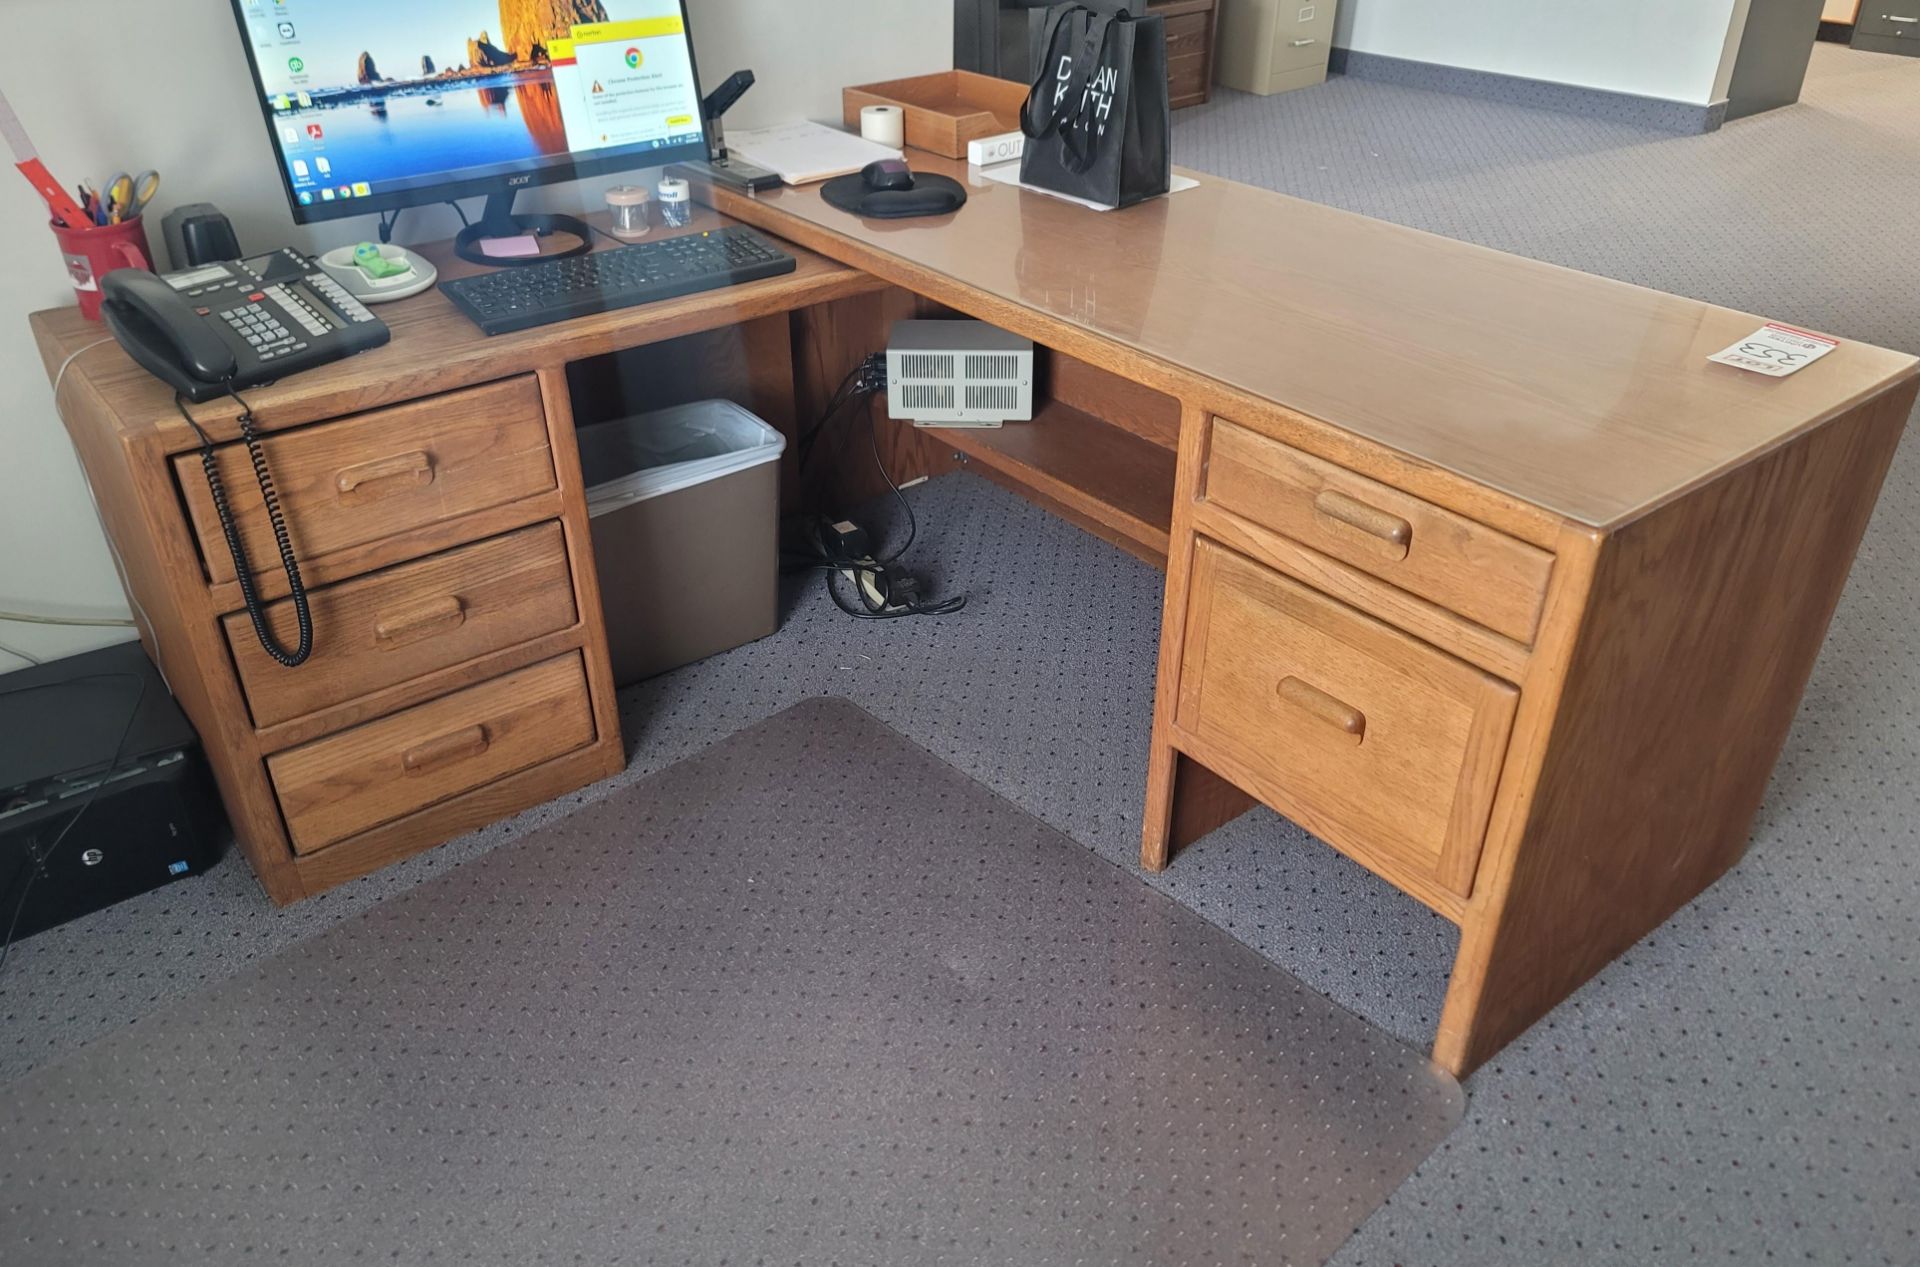 L-SHAPED OFFICE DESK, 66" X 62", CONTENTS NOT INCLUDED